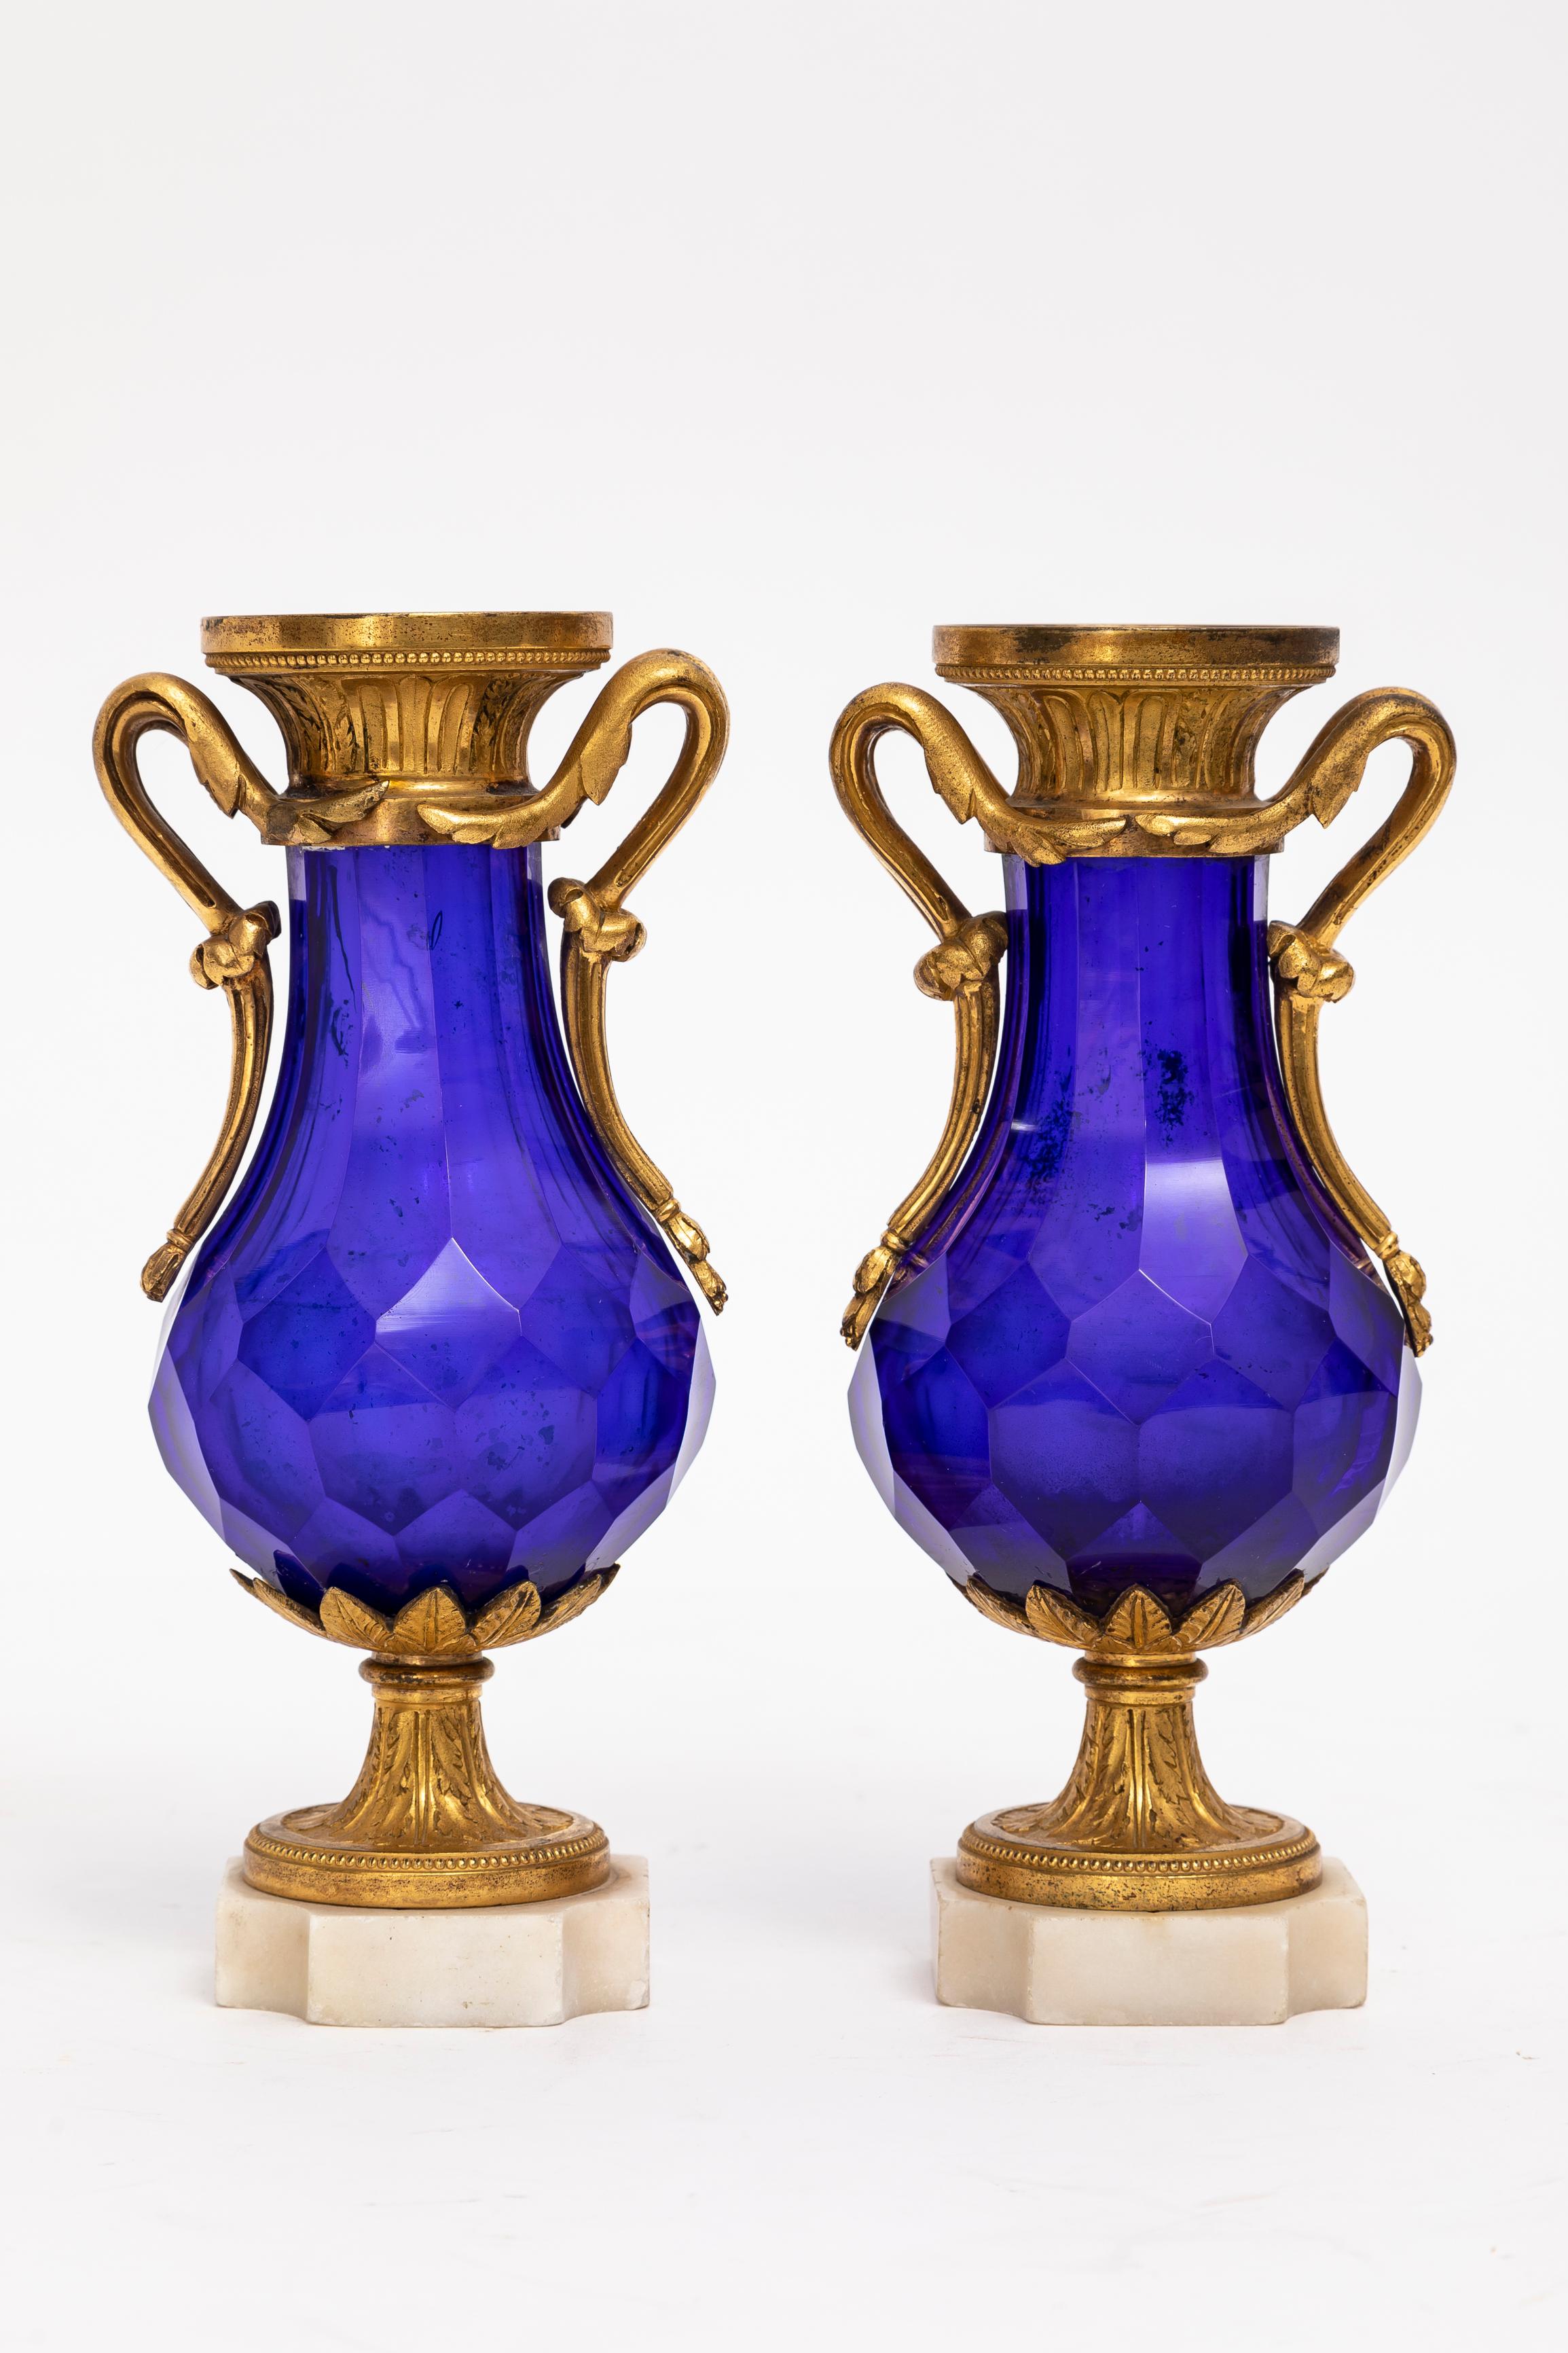 A Magnificent Pair of Russian Cobalt Blue Crystal and Ormolu Mounted Vases, Louis XVI Period. Each of these vases, showcases the highest level of craftsmanship and artistic excellence. The cobalt blue crystal is a captivating focal point,